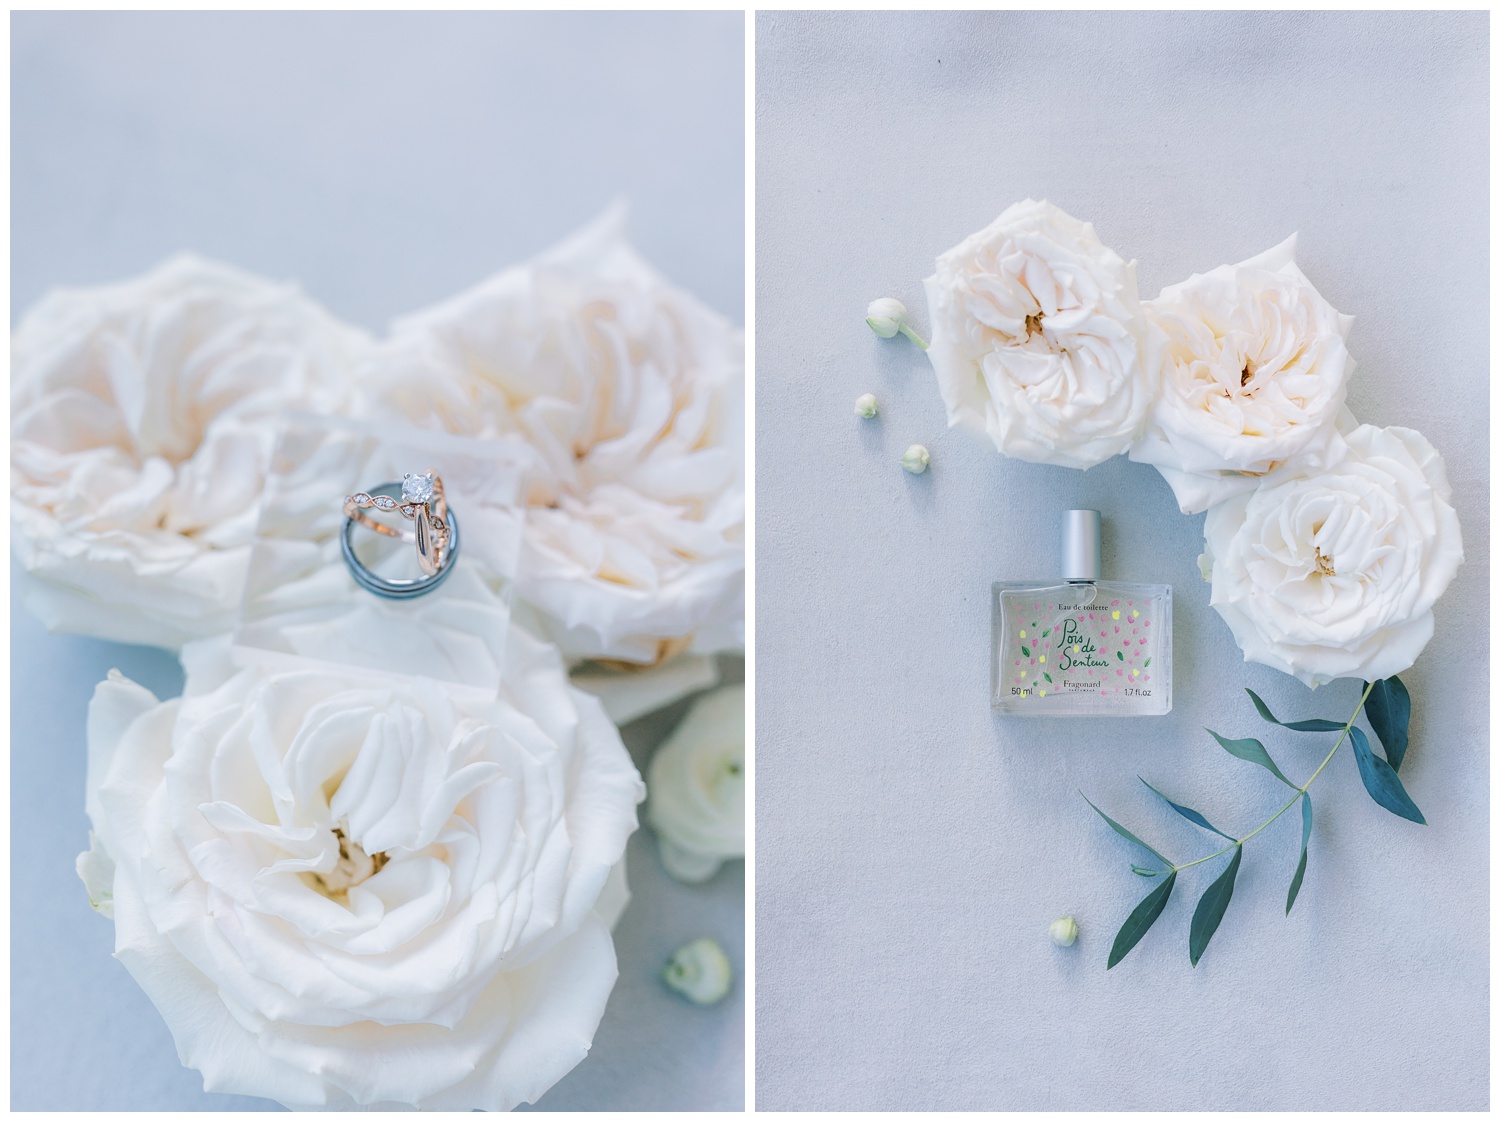 Wedding rings and perfume with wedding flowers flat lay